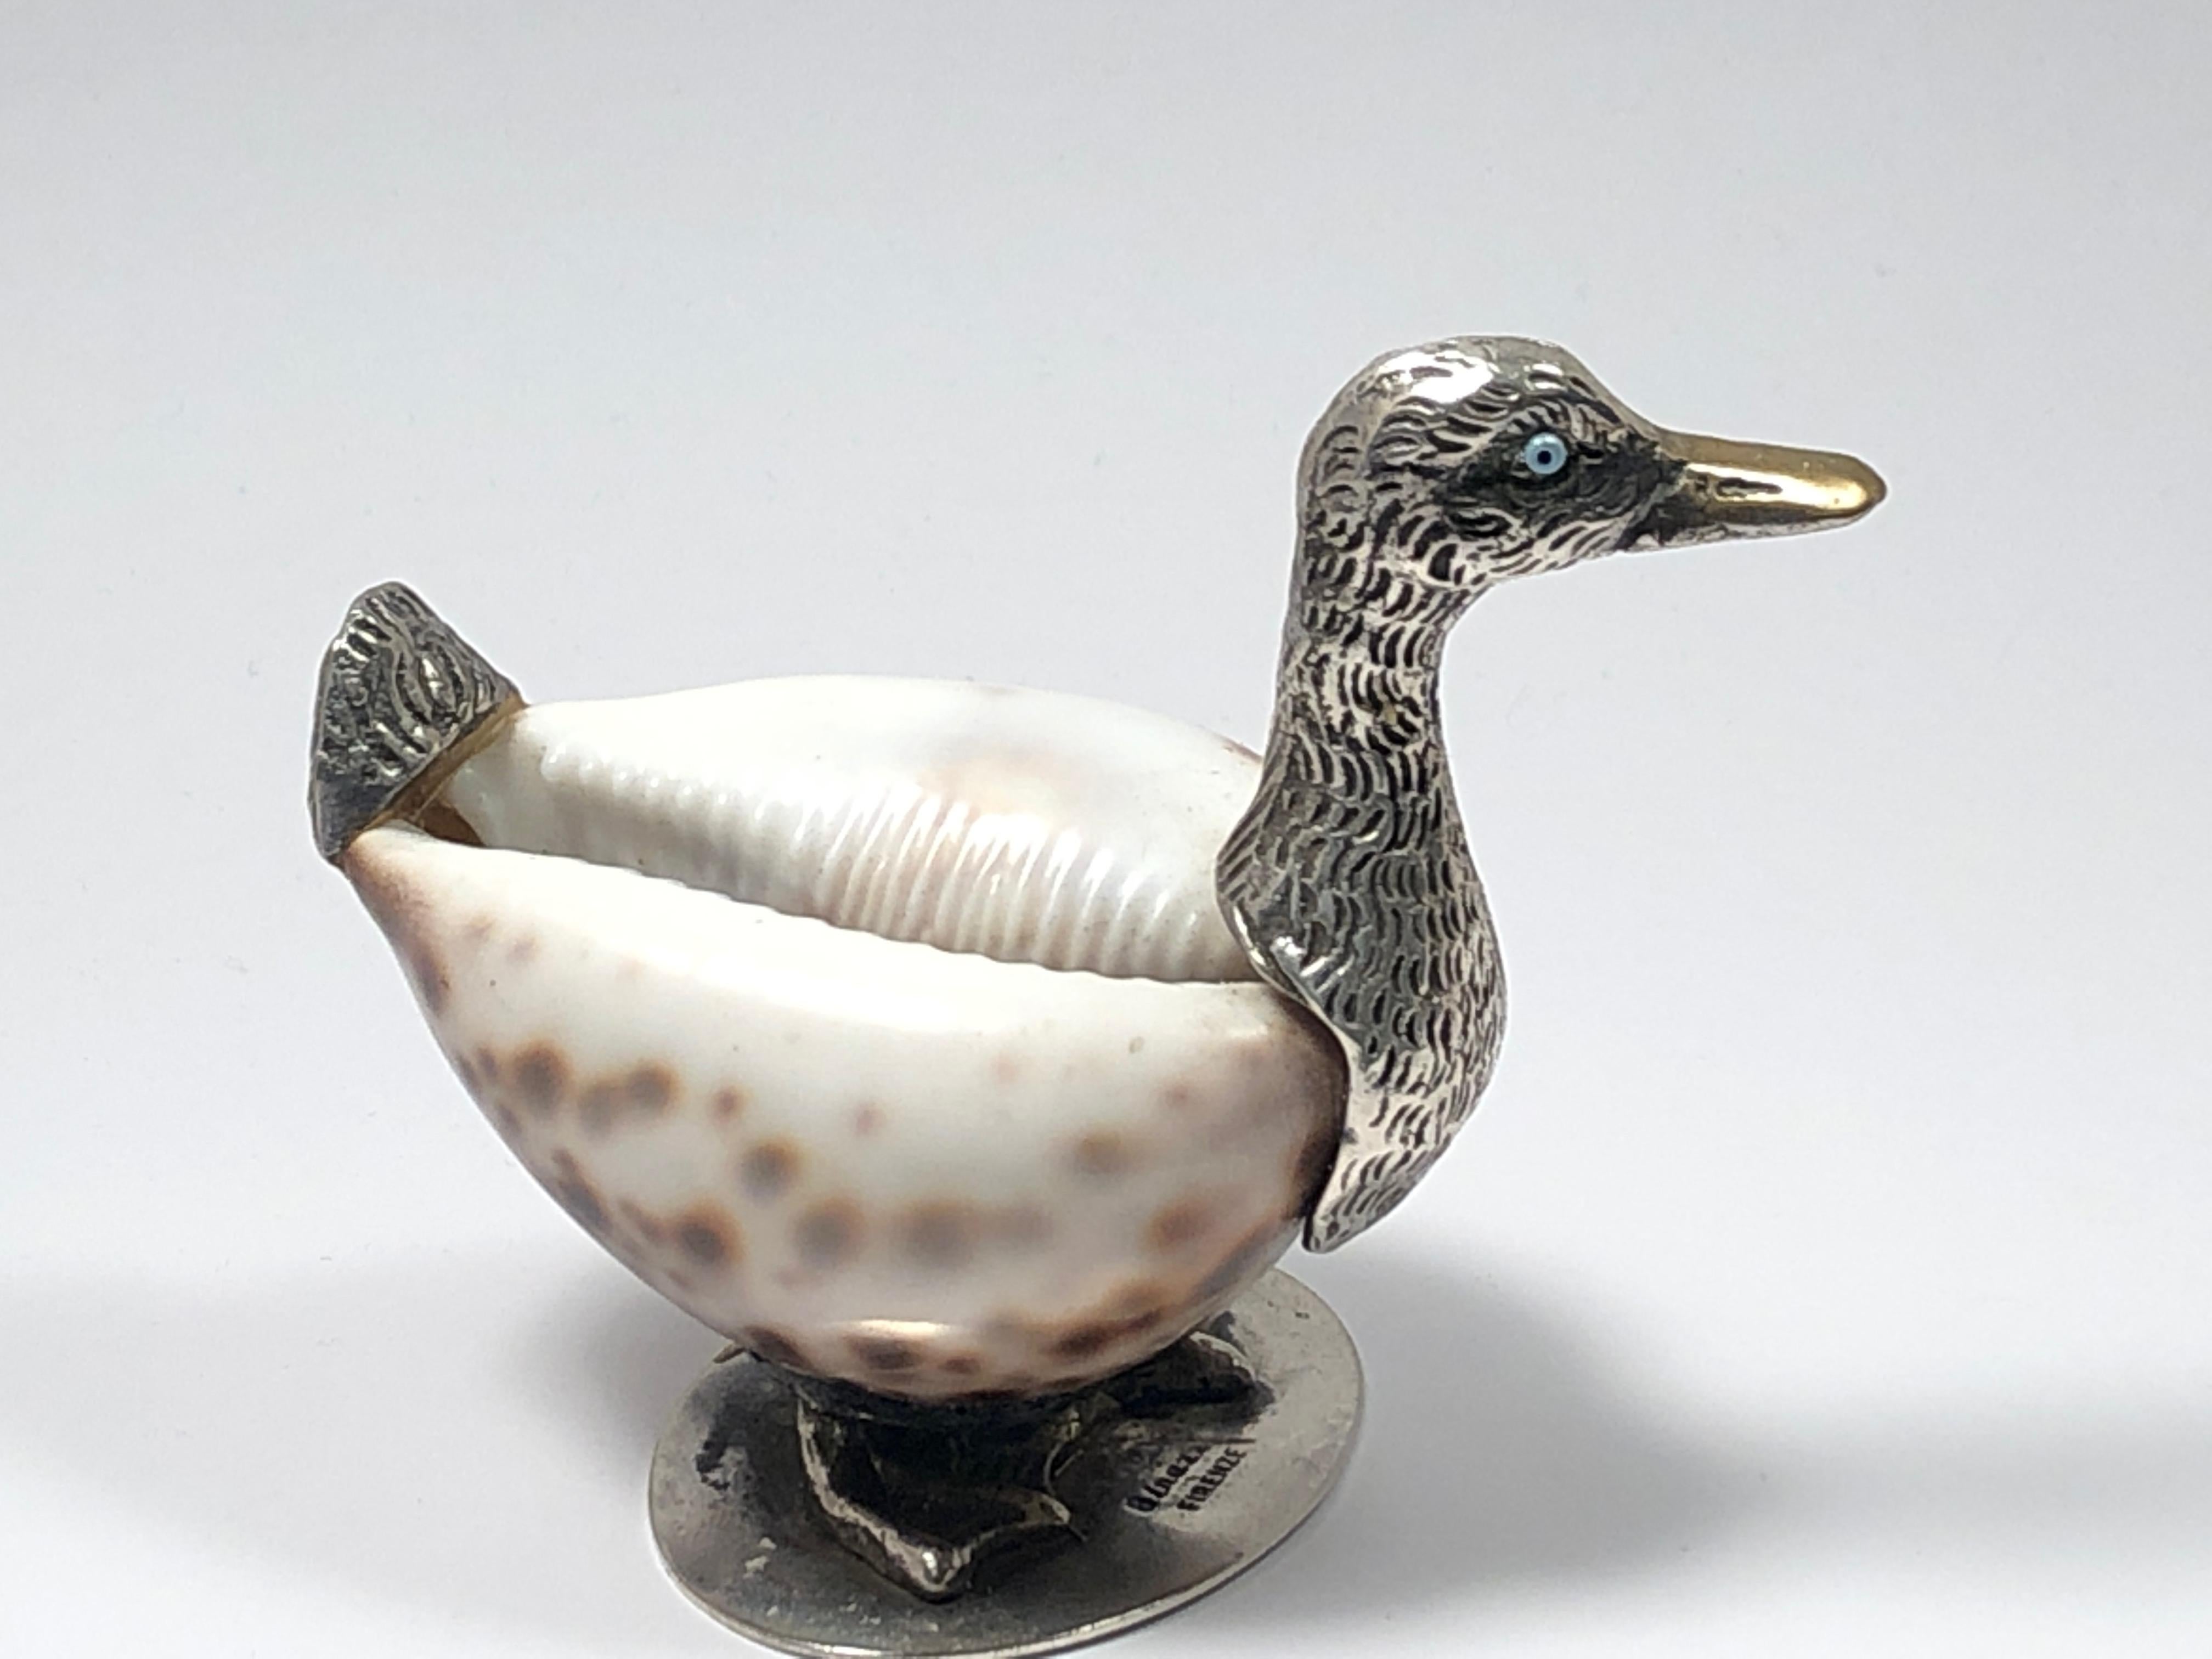 Rare signed Binazzi Italy small duck trinket bowl. Natural shell combined with silver plated sculpture.

1970s, made in Italy. 

This piece is in near excellent condition with some signs of ageing but no structural damage.

An amazing and